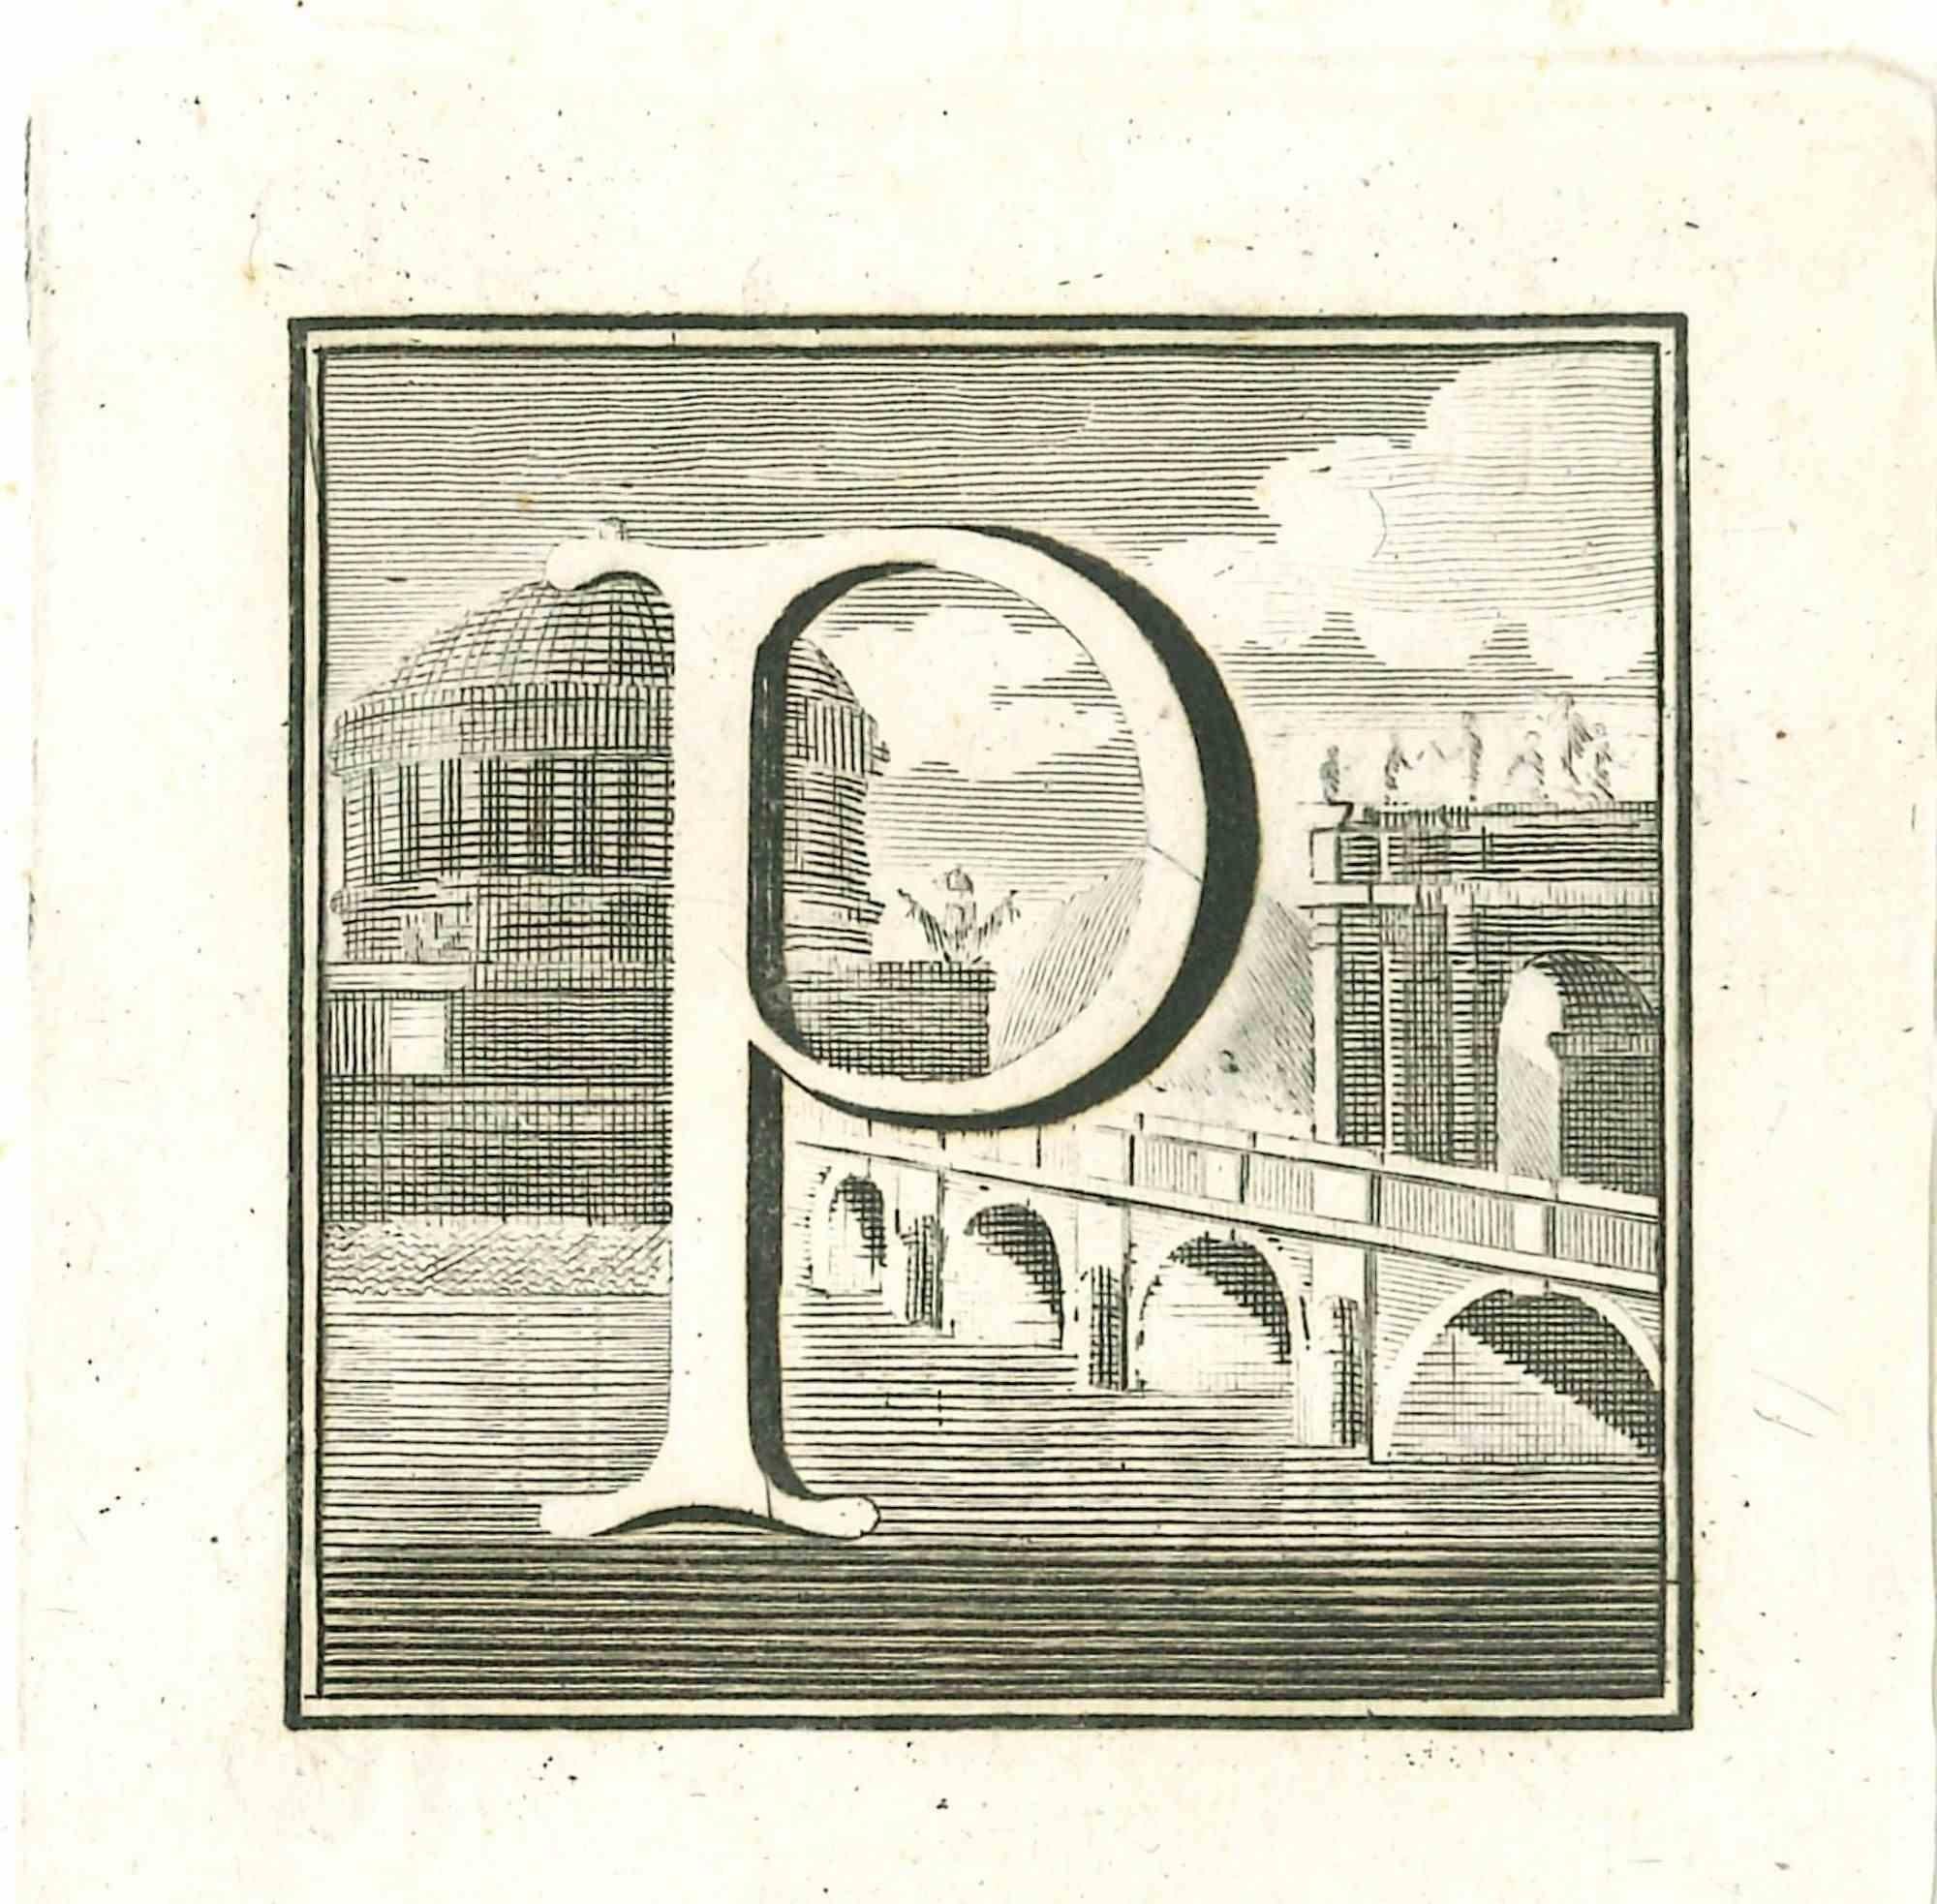 Unknown Figurative Print - Capital letter P from the Antiquities of Herculaneum - Etching - 18th Century